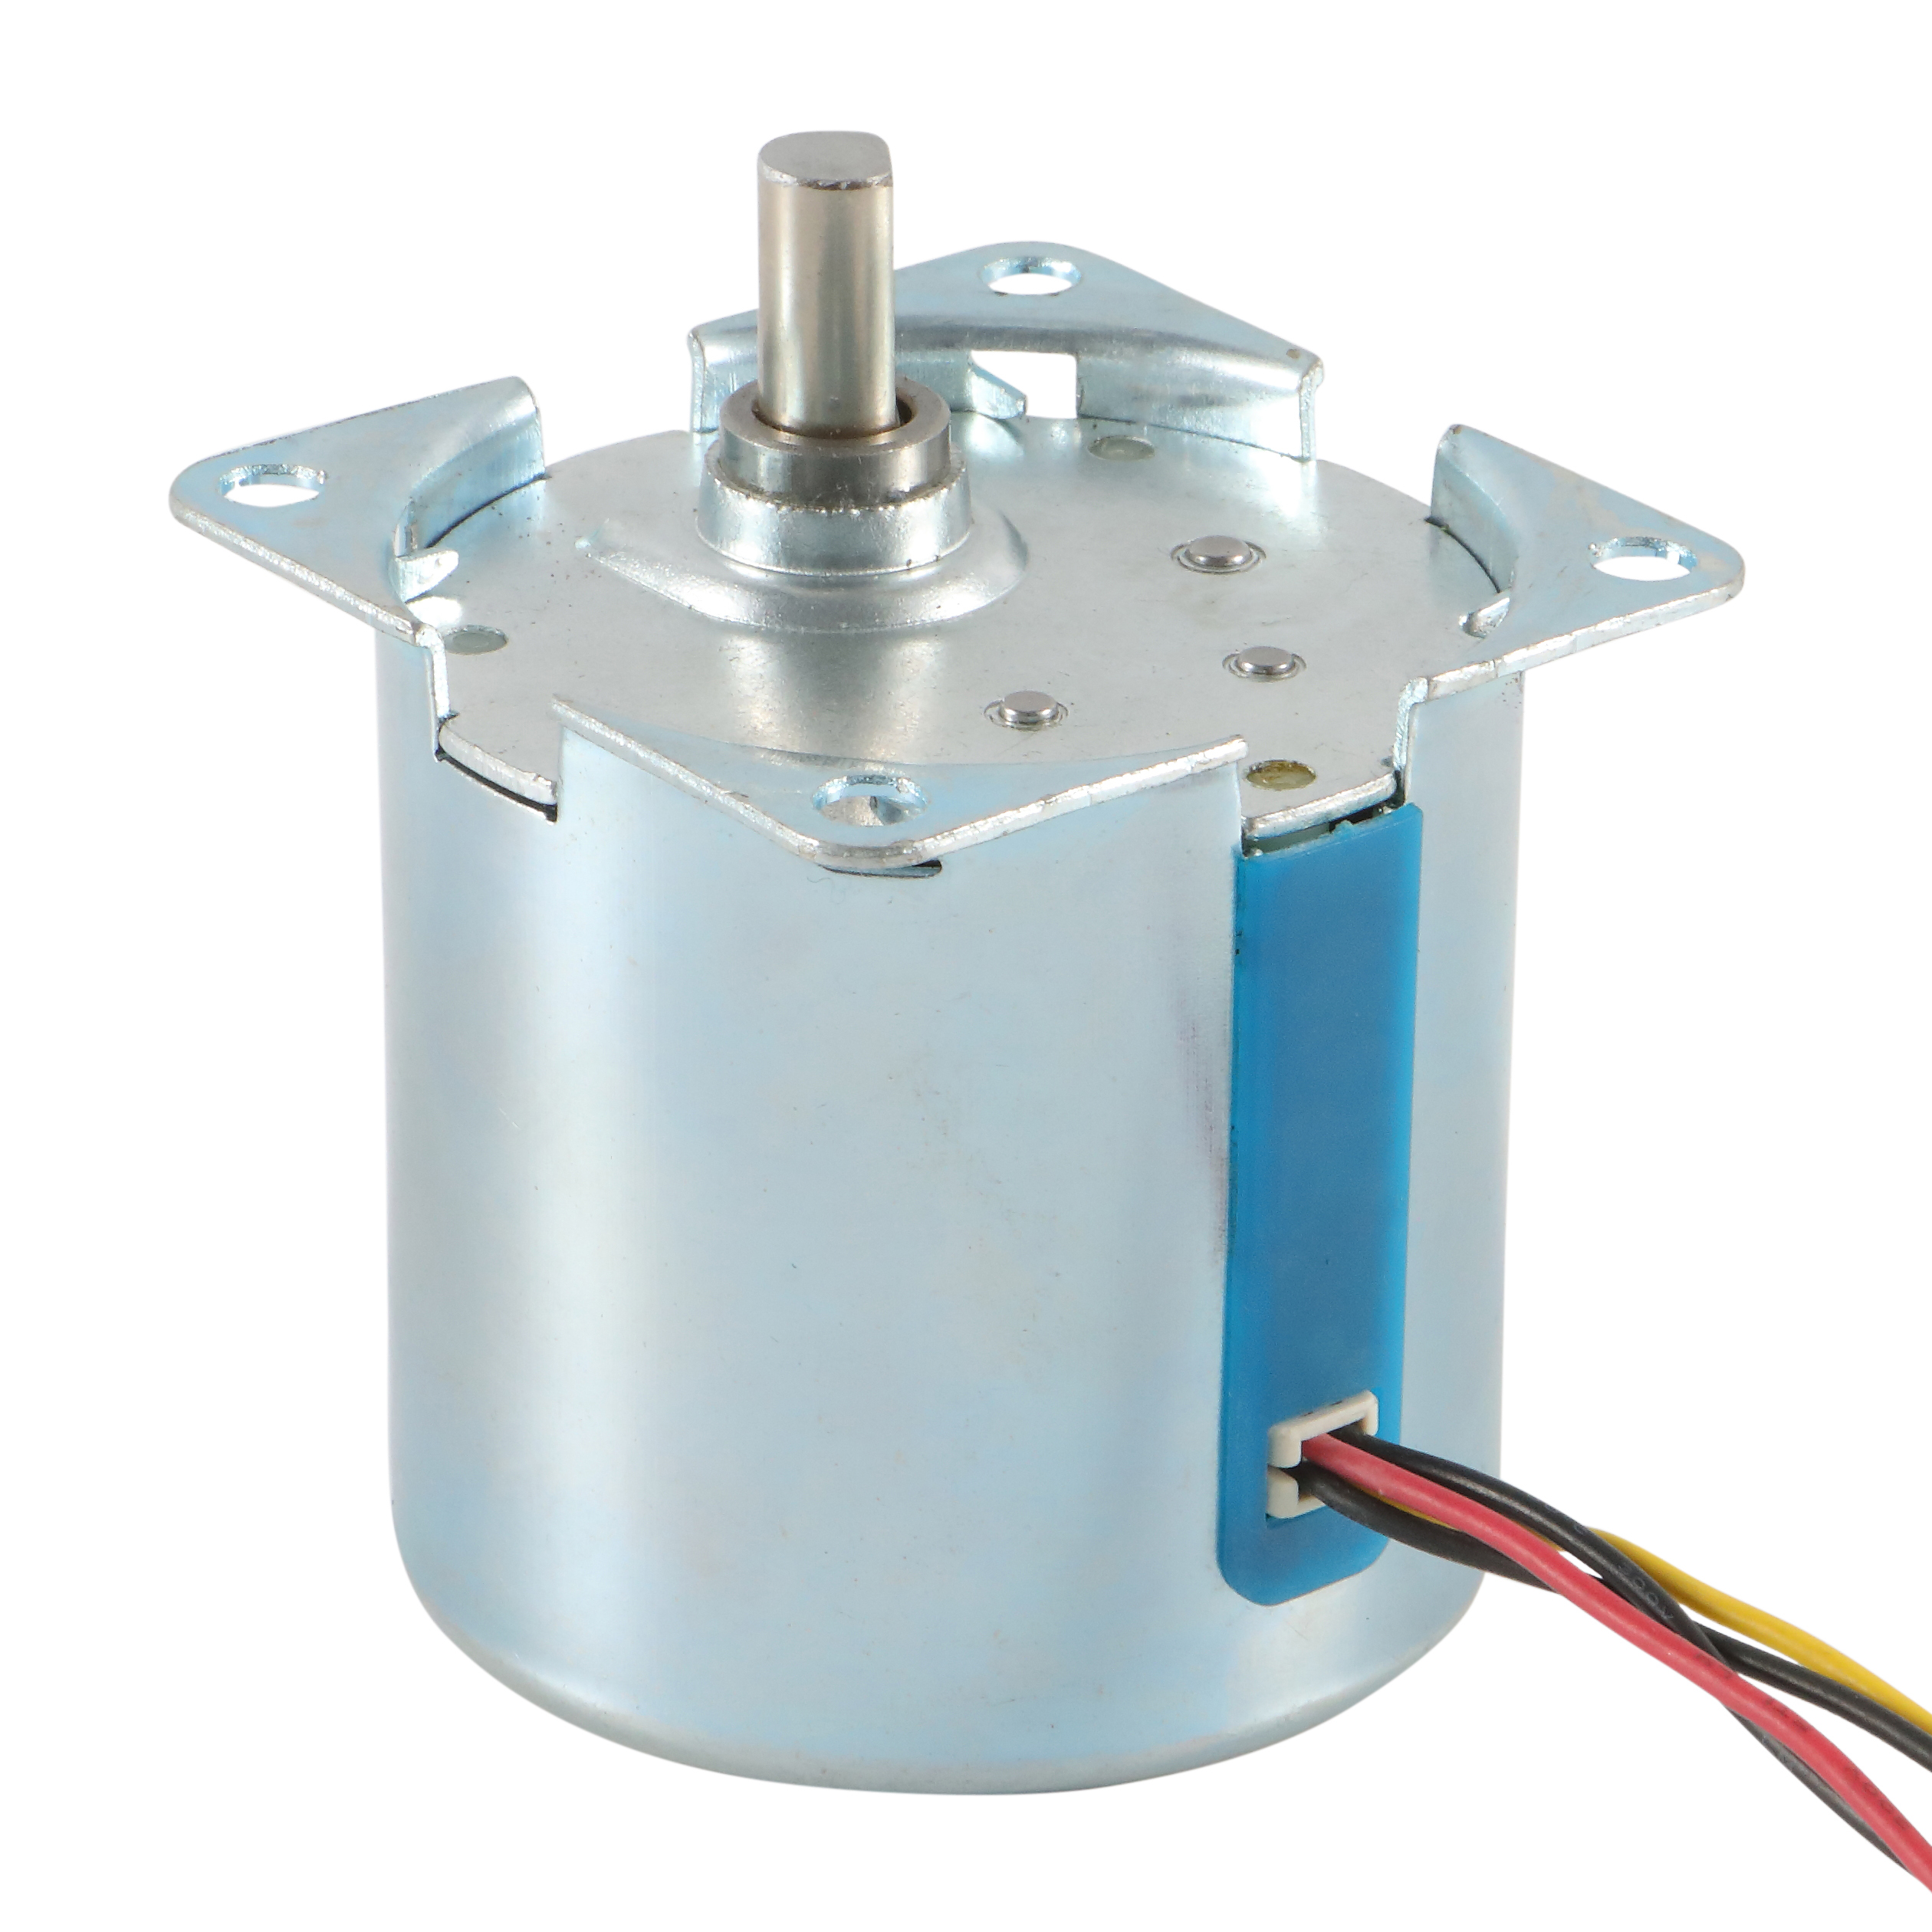 59mm AC Synchronous Motor